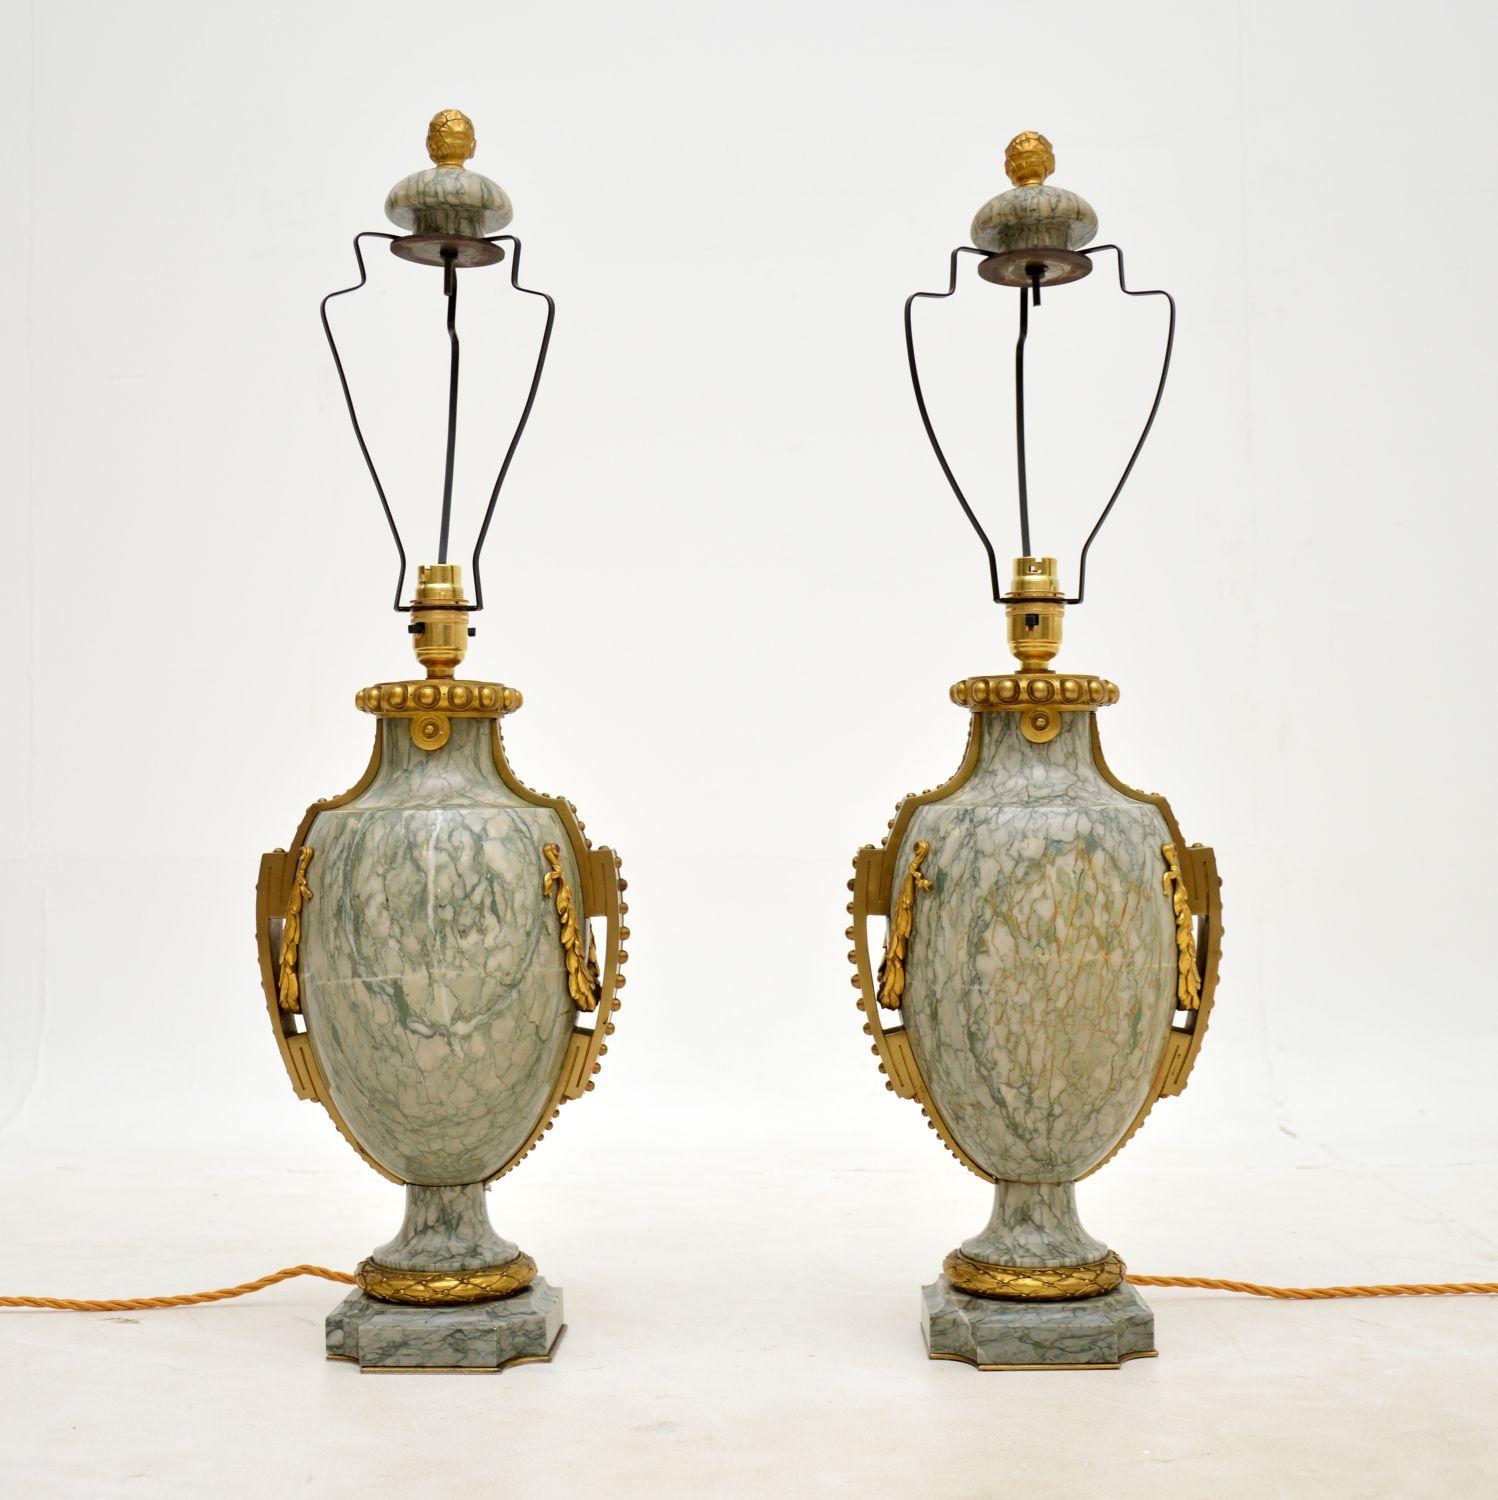 Neoclassical Pair of Antique French Marble & Gilt Bronze Table Lamps